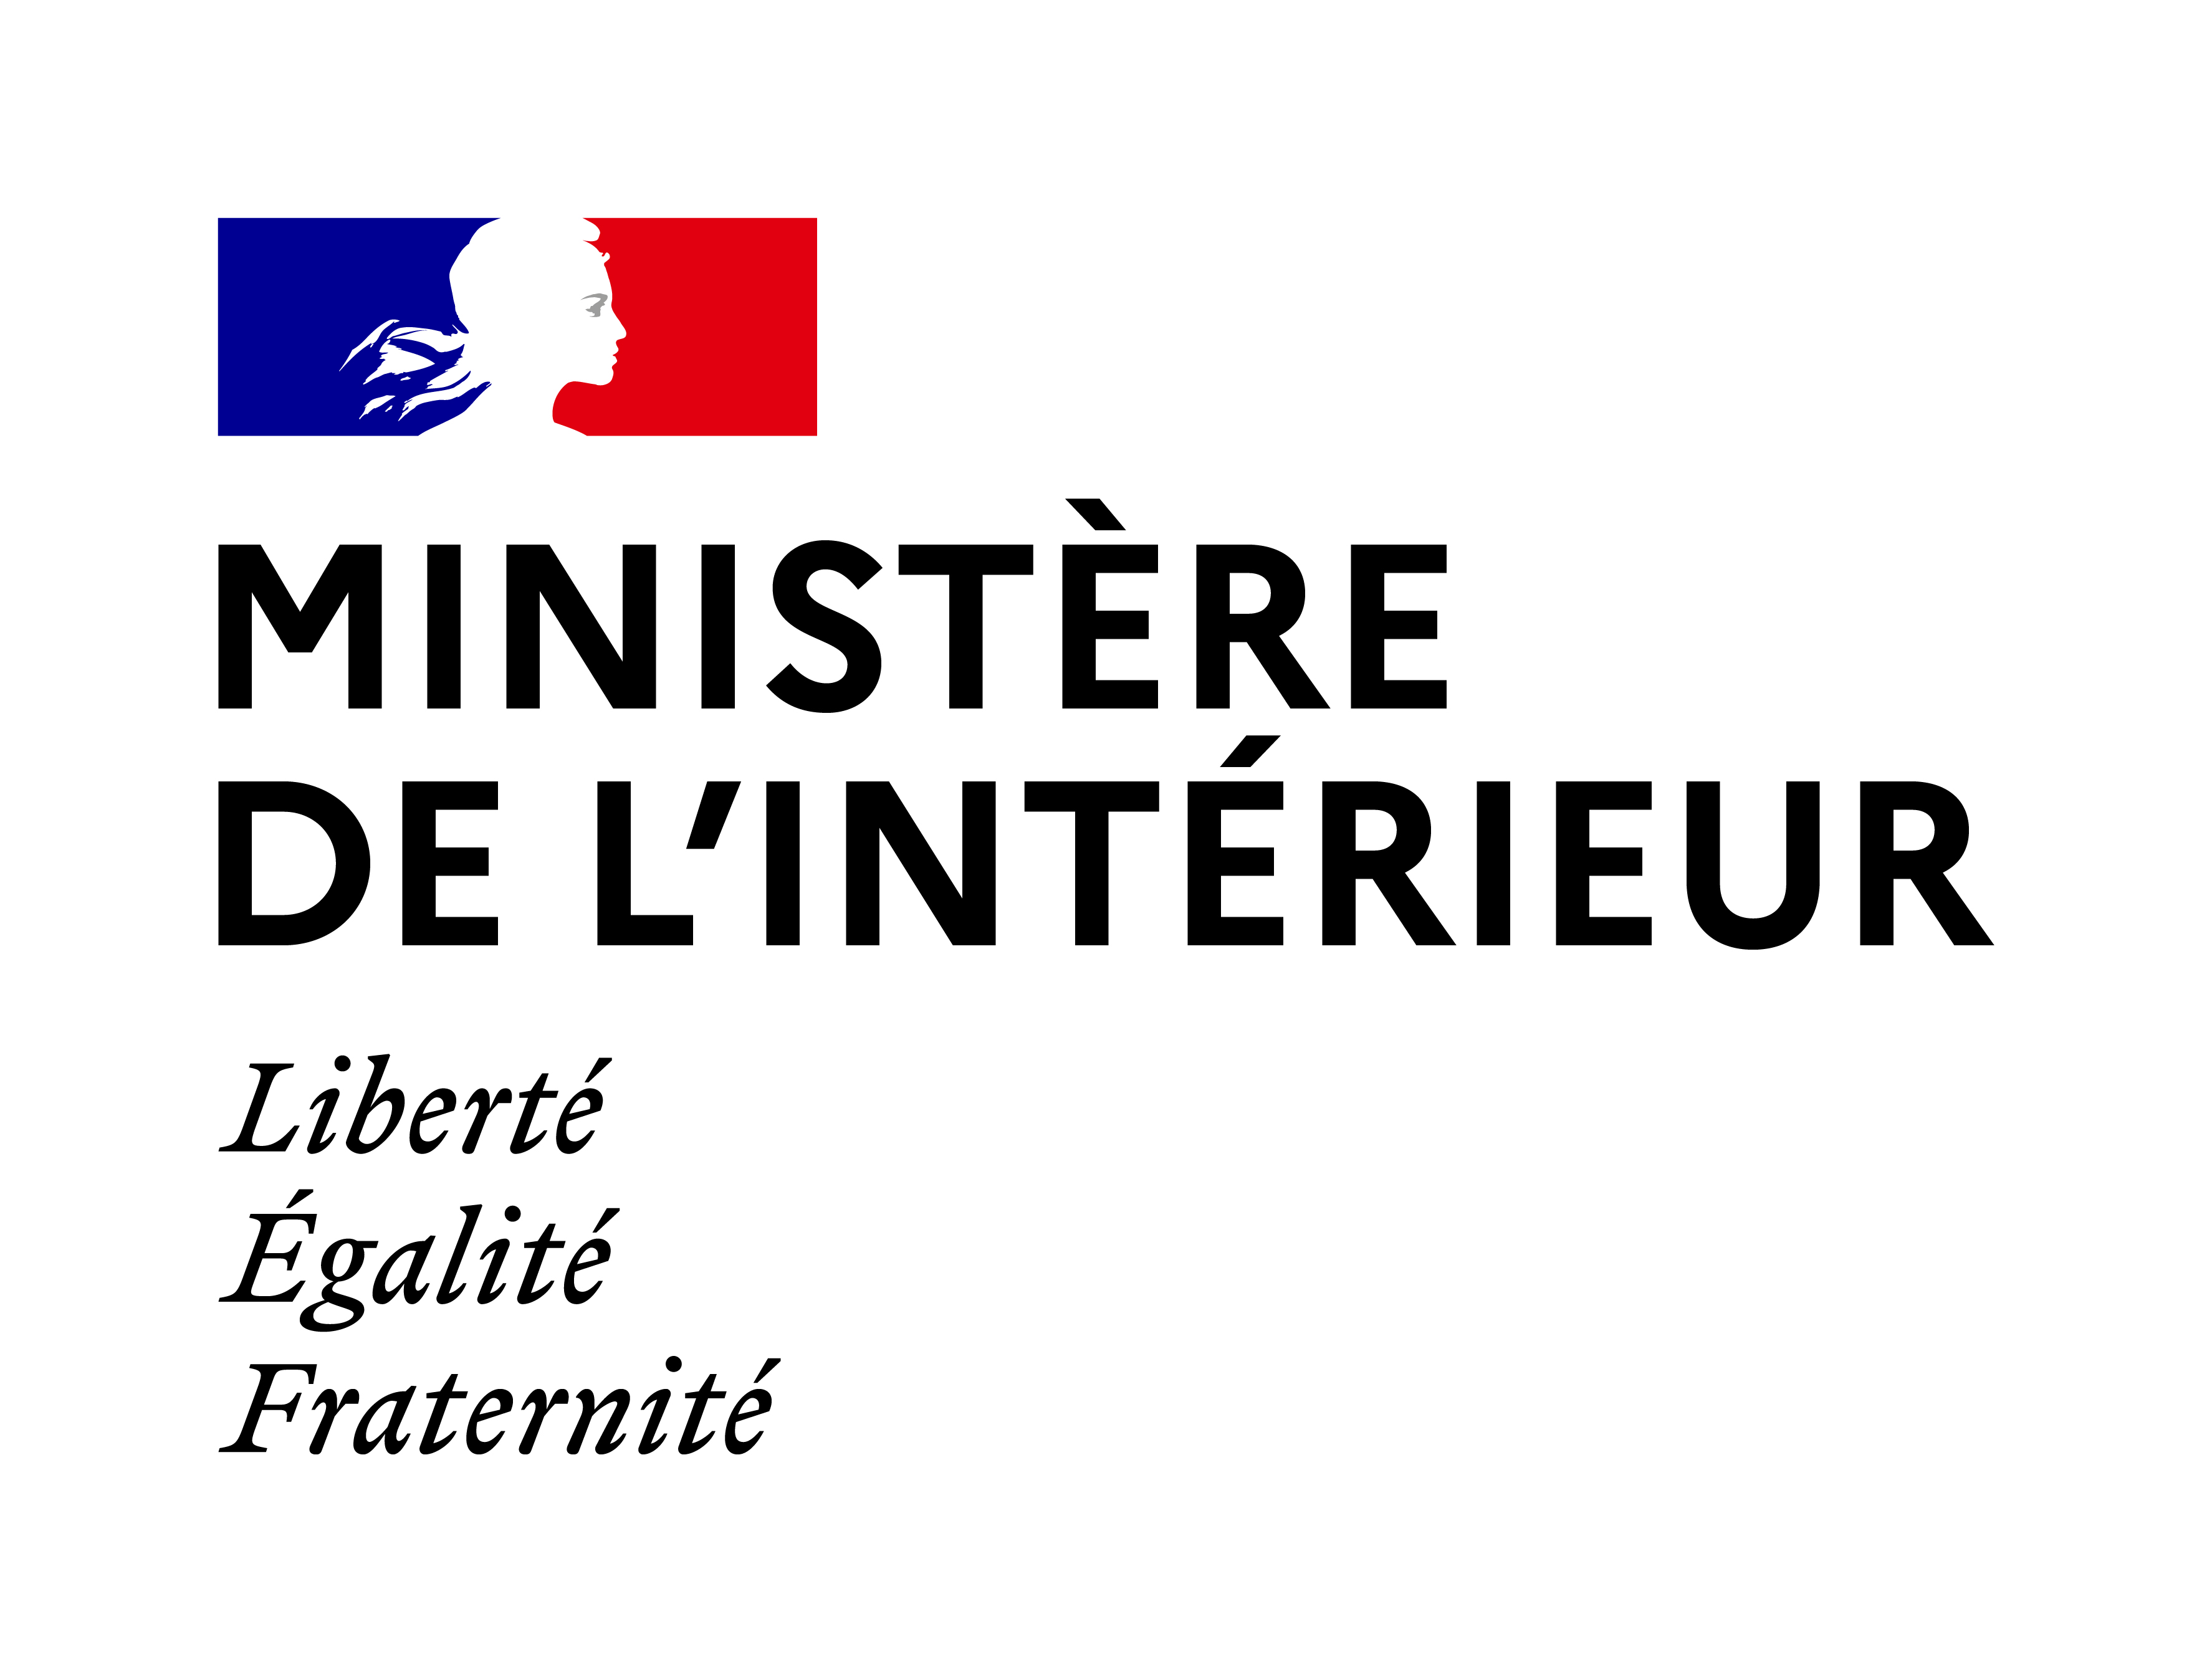 Ministry of Interior (France)